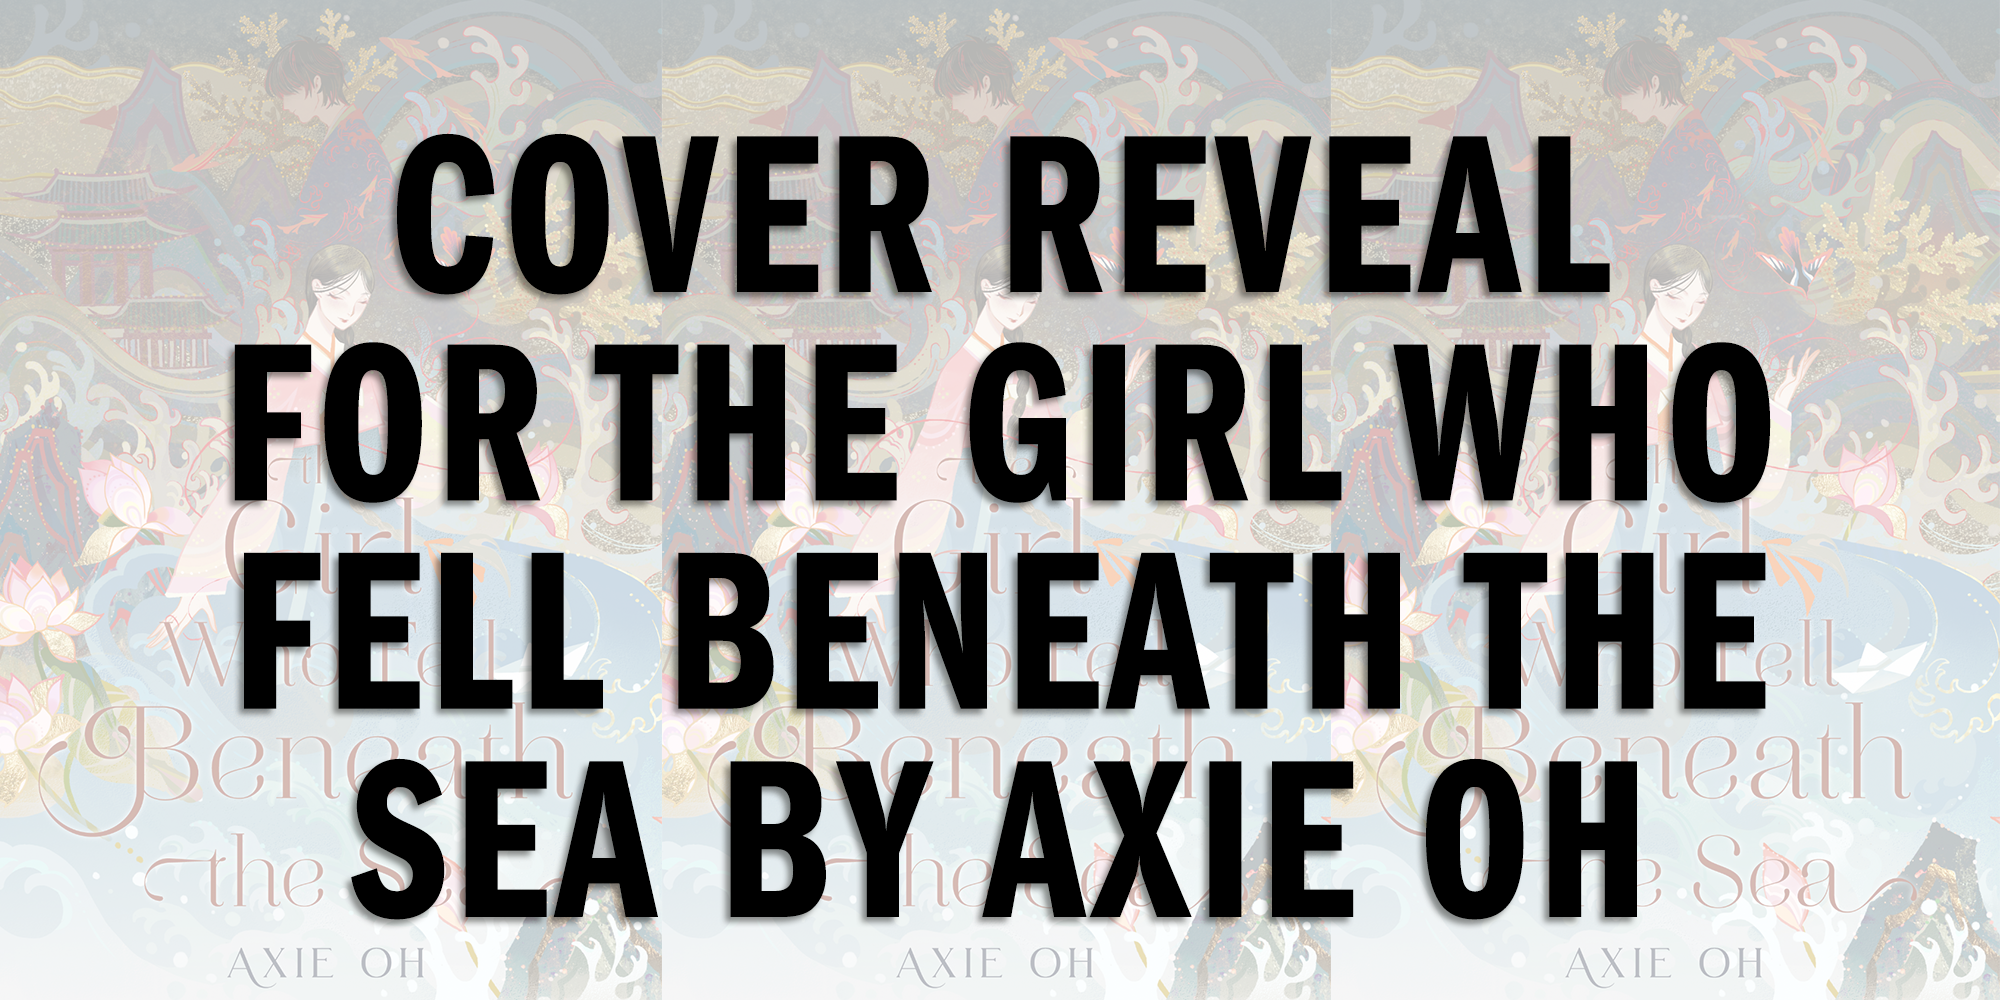 Cover Reveal for The Girl Who Fell Beneath the Sea by Axie Oh